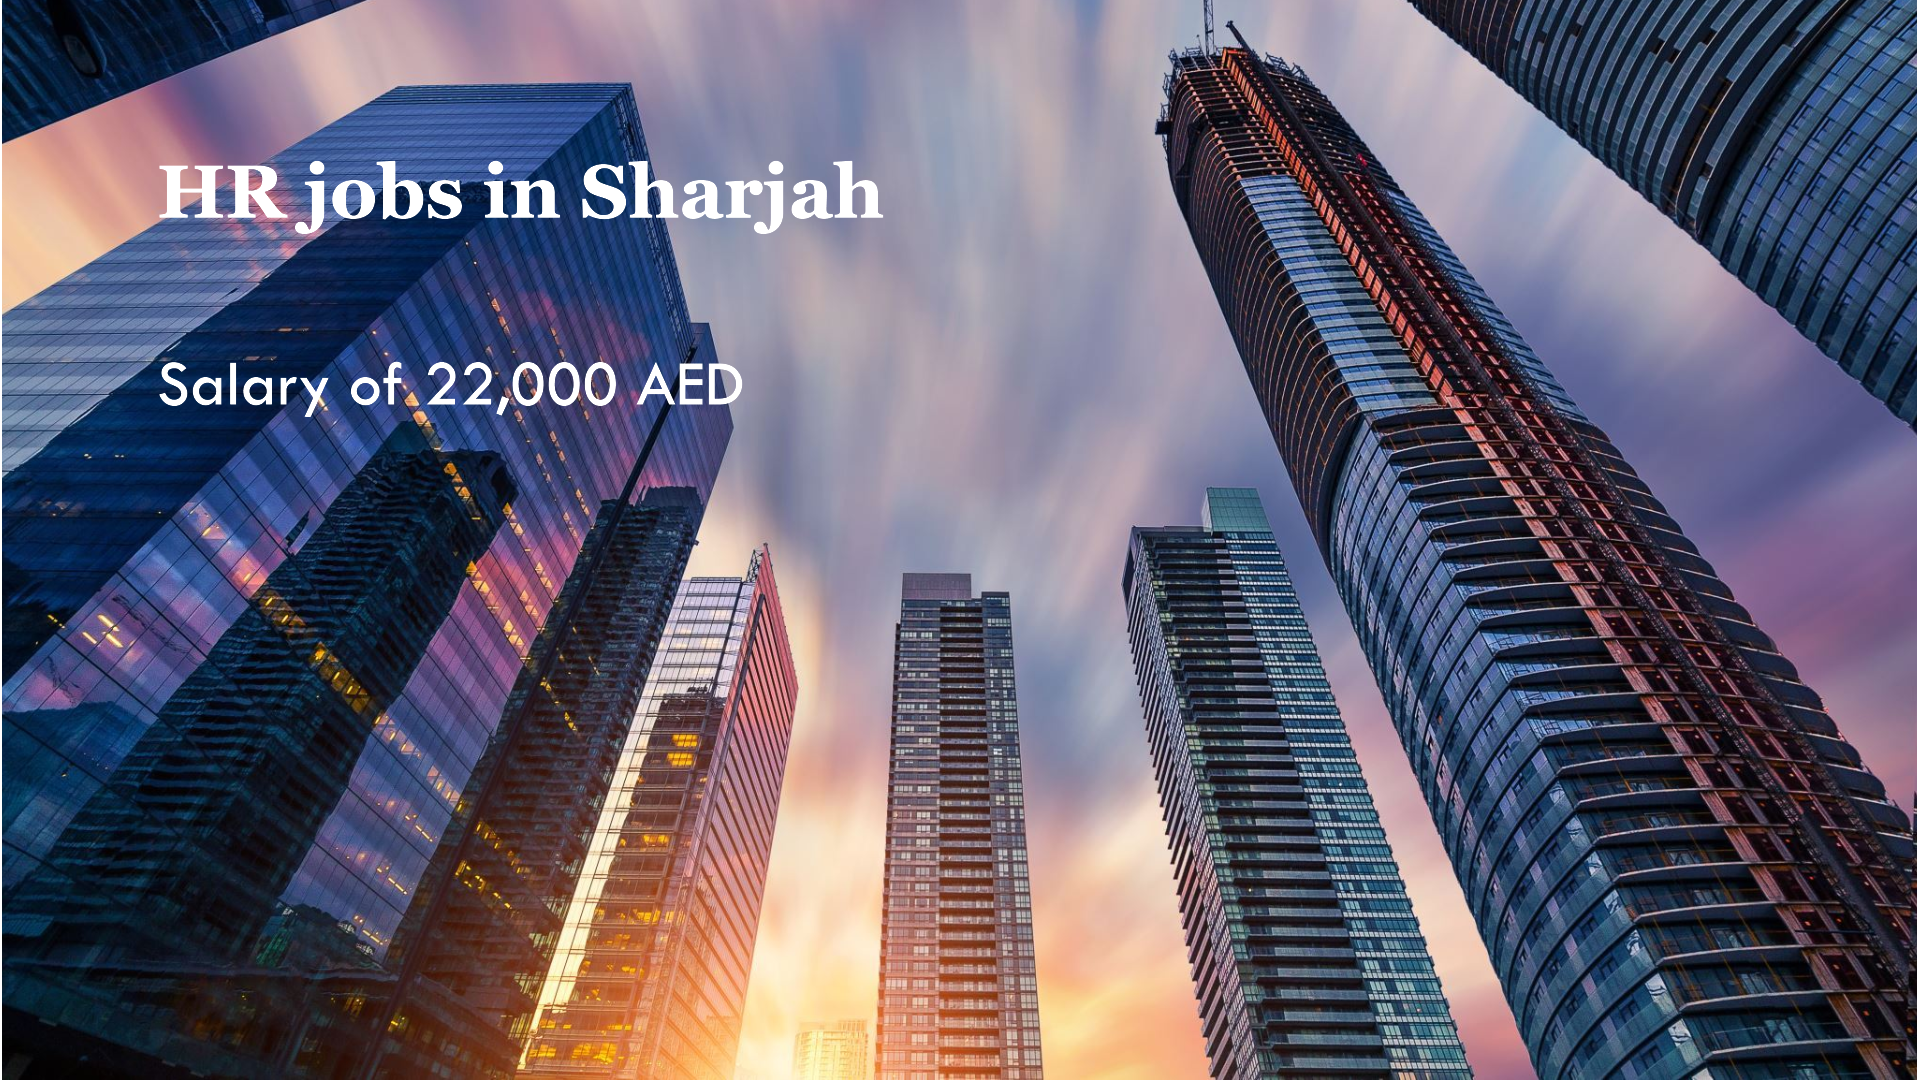 HR jobs in Sharjah with salary 22,000 AED